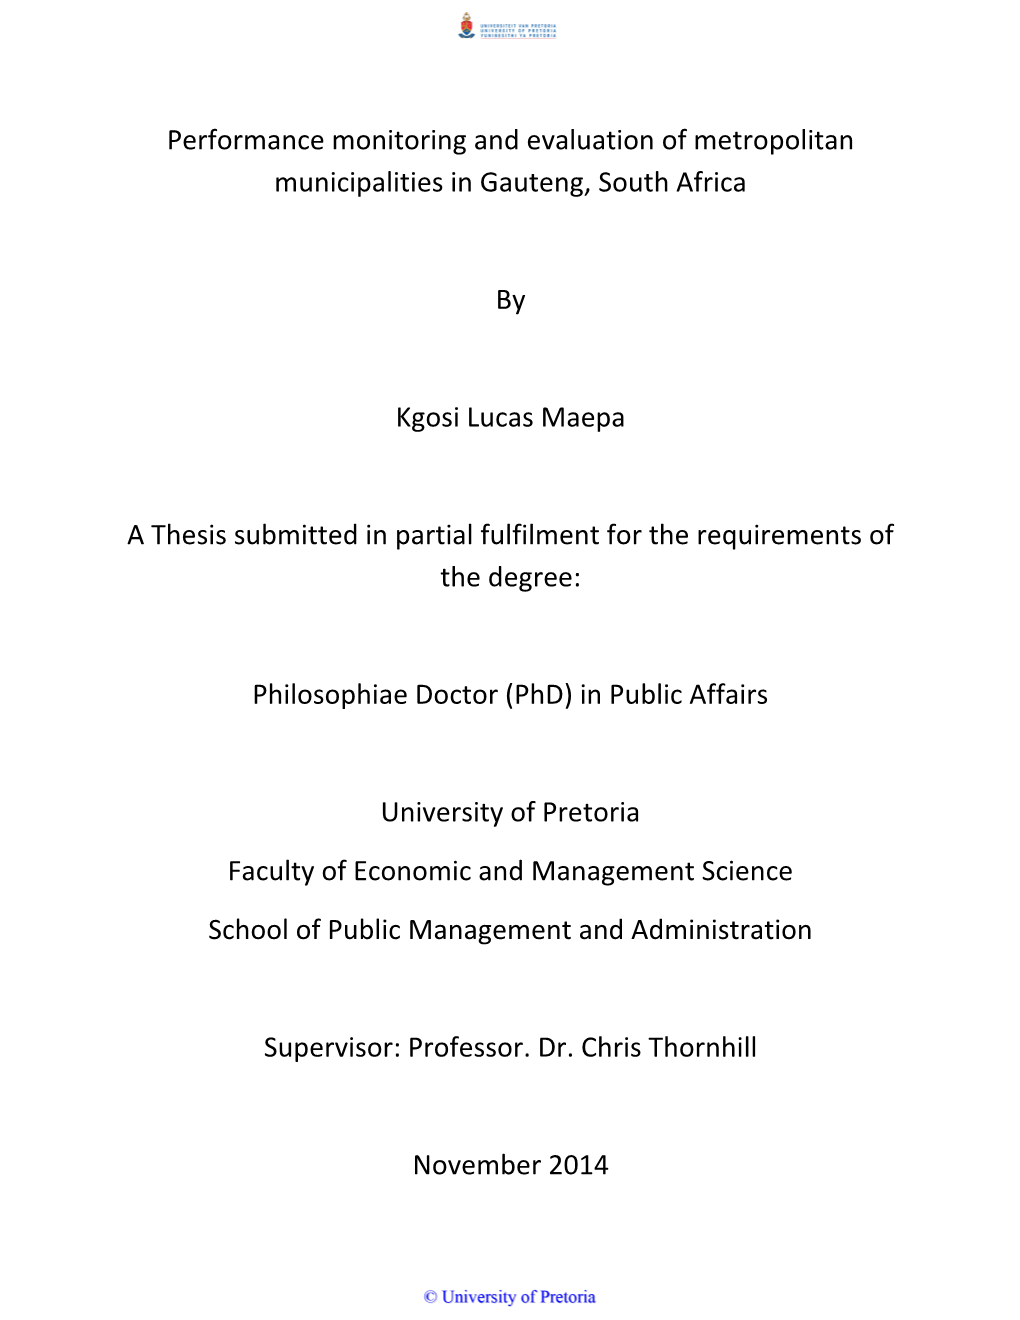 Performance Monitoring and Evaluation of Metropolitan Municipalities in Gauteng, South Africa